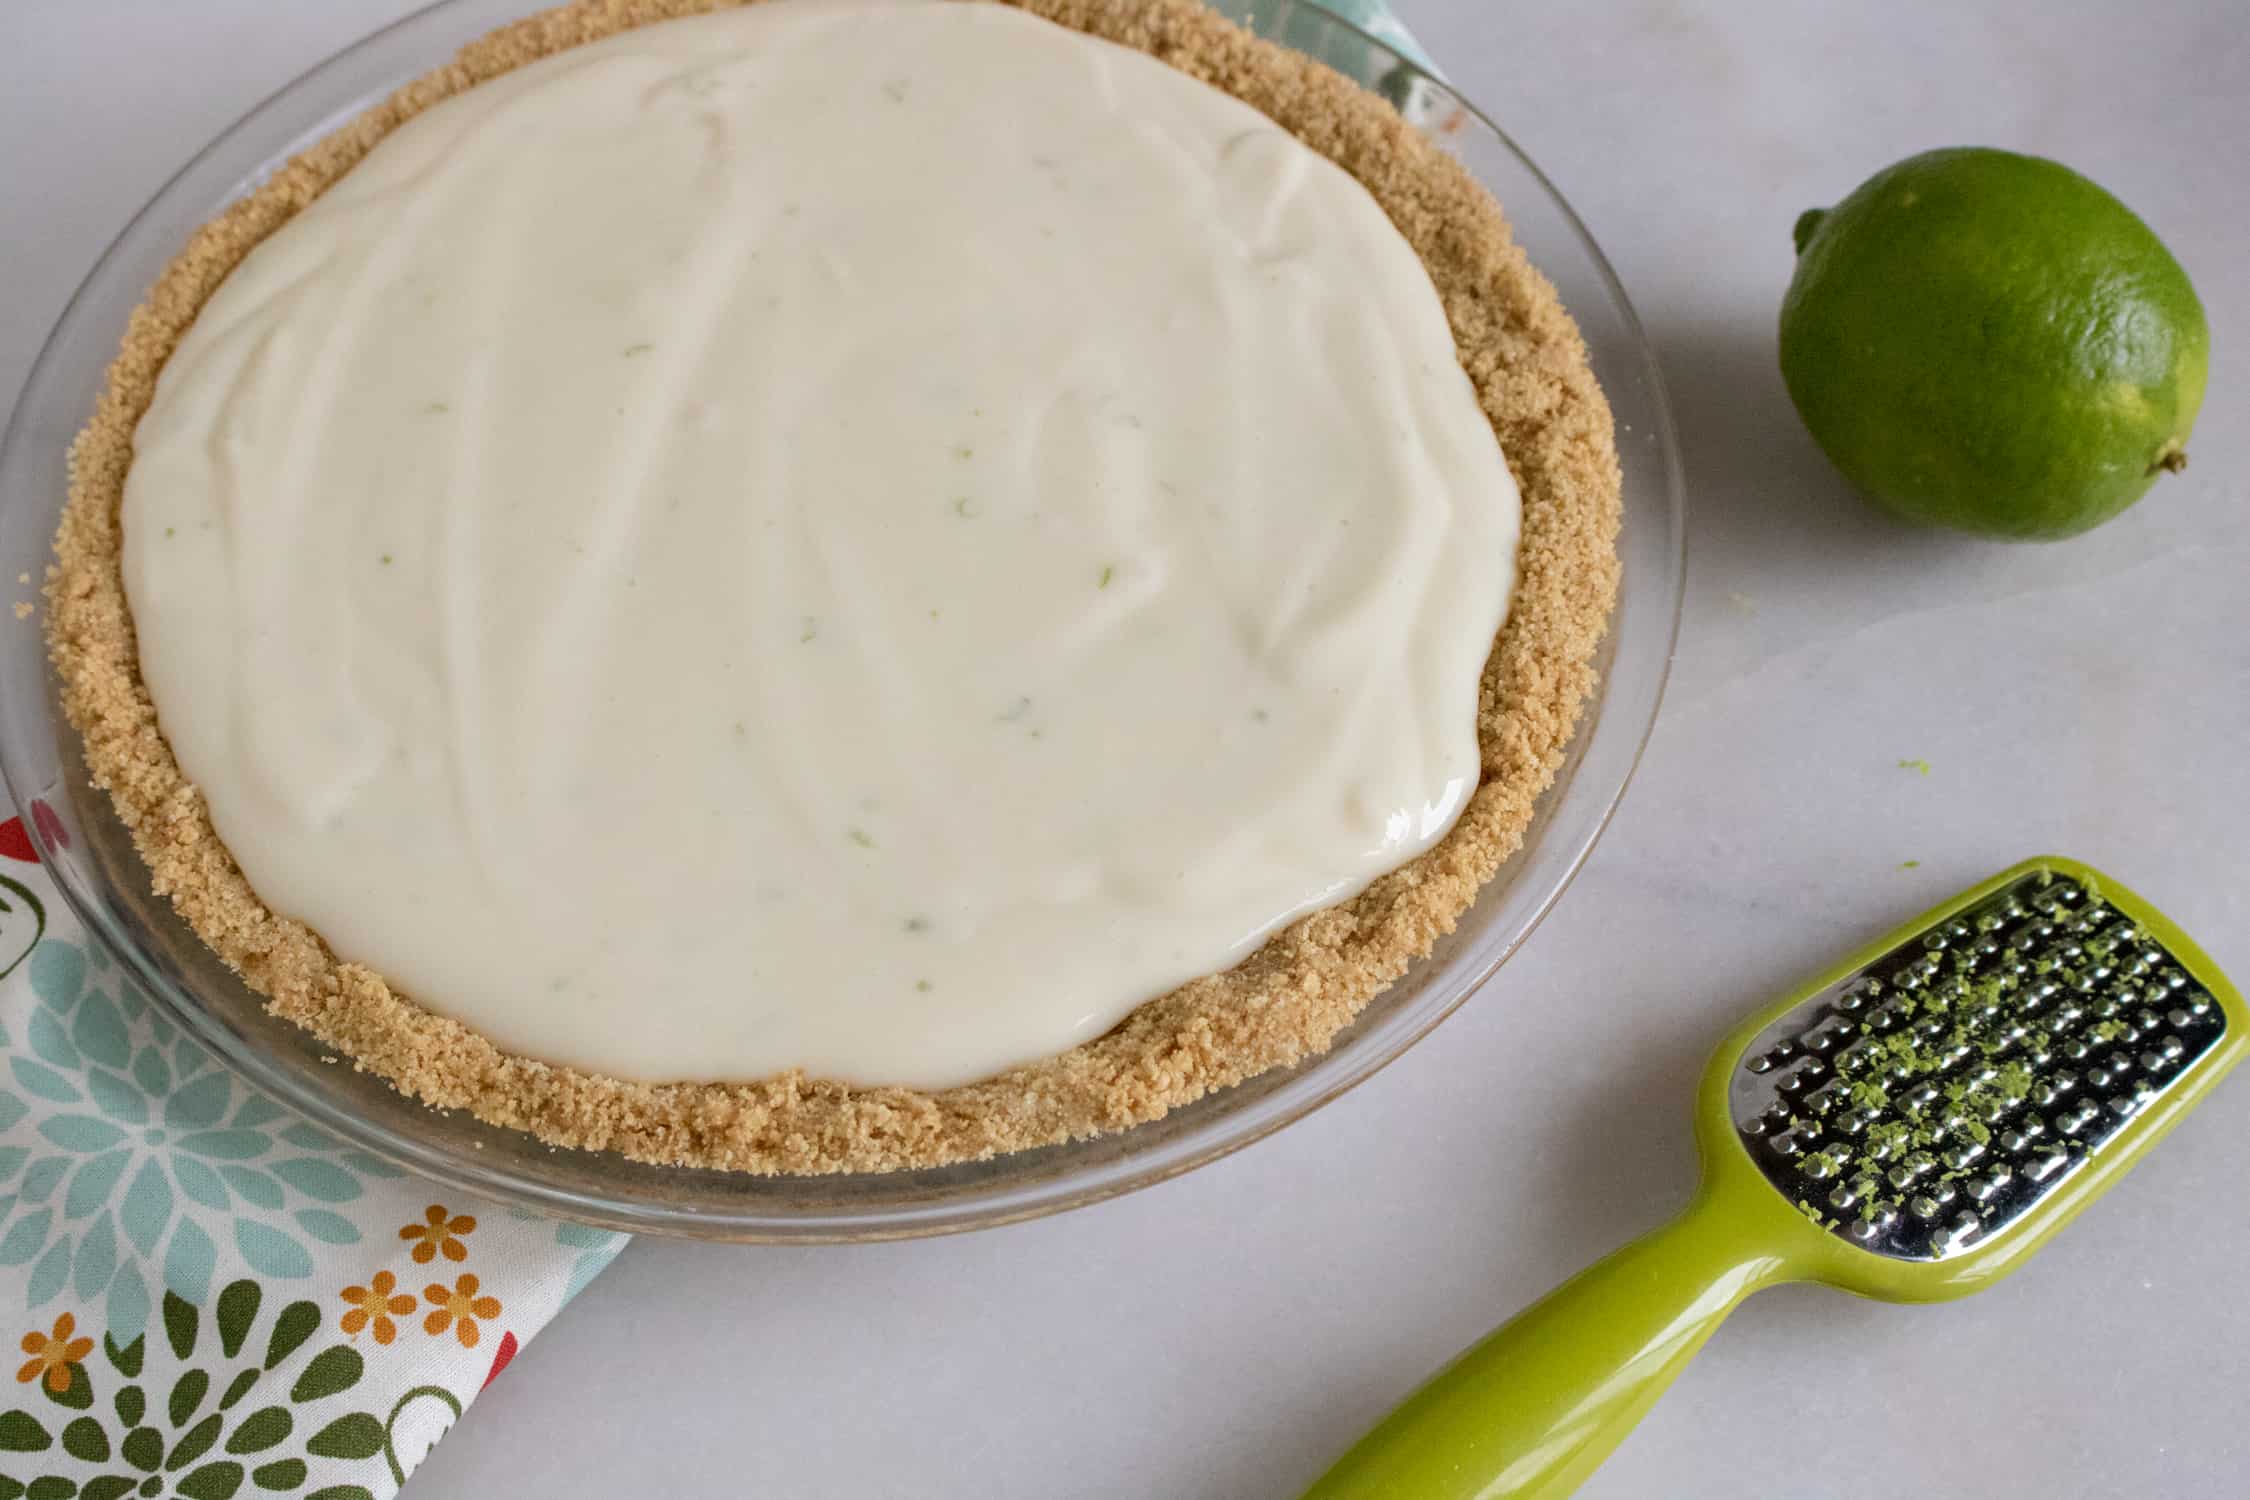 Graham cracker crust with pie filling added. Lime, zest grater and kitchen towel beside.